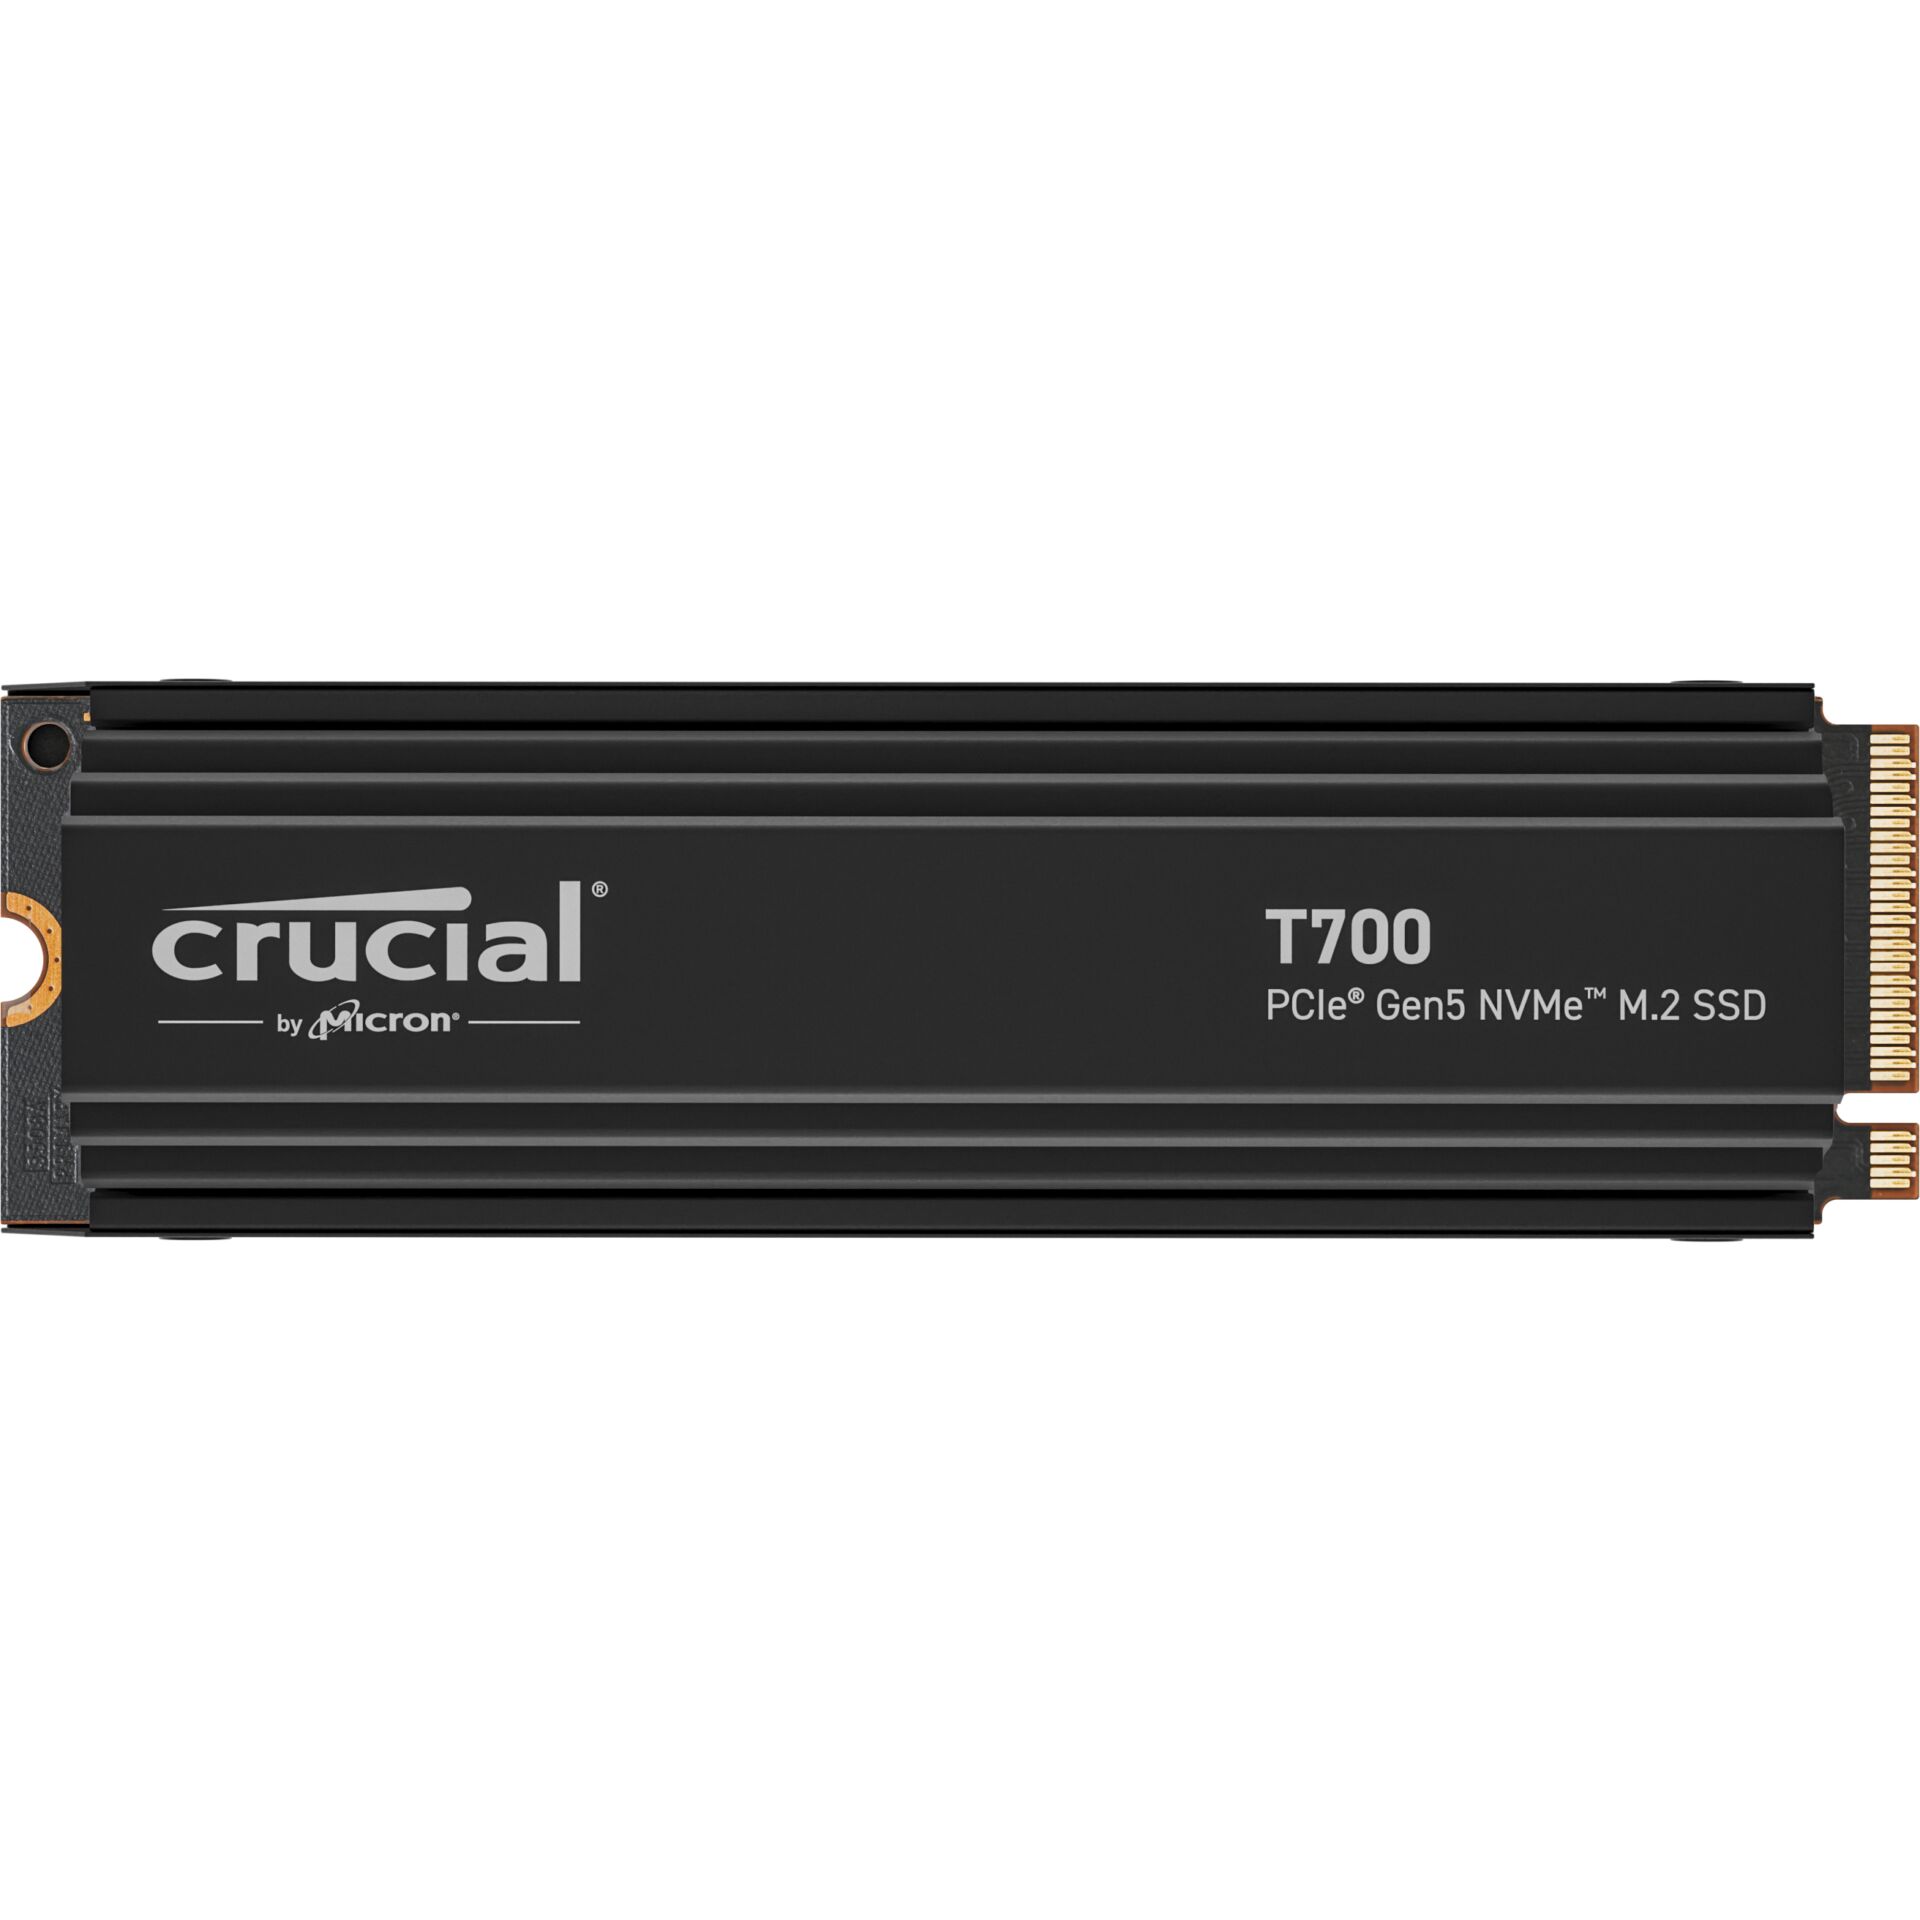 1.0 TB SSD Crucial T700 SSD, M.2/M-Key (PCIe 5.0 x4), lesen: 11700MB/s, schreiben: 9500MB/s SLC-Cached, TBW: 600TB